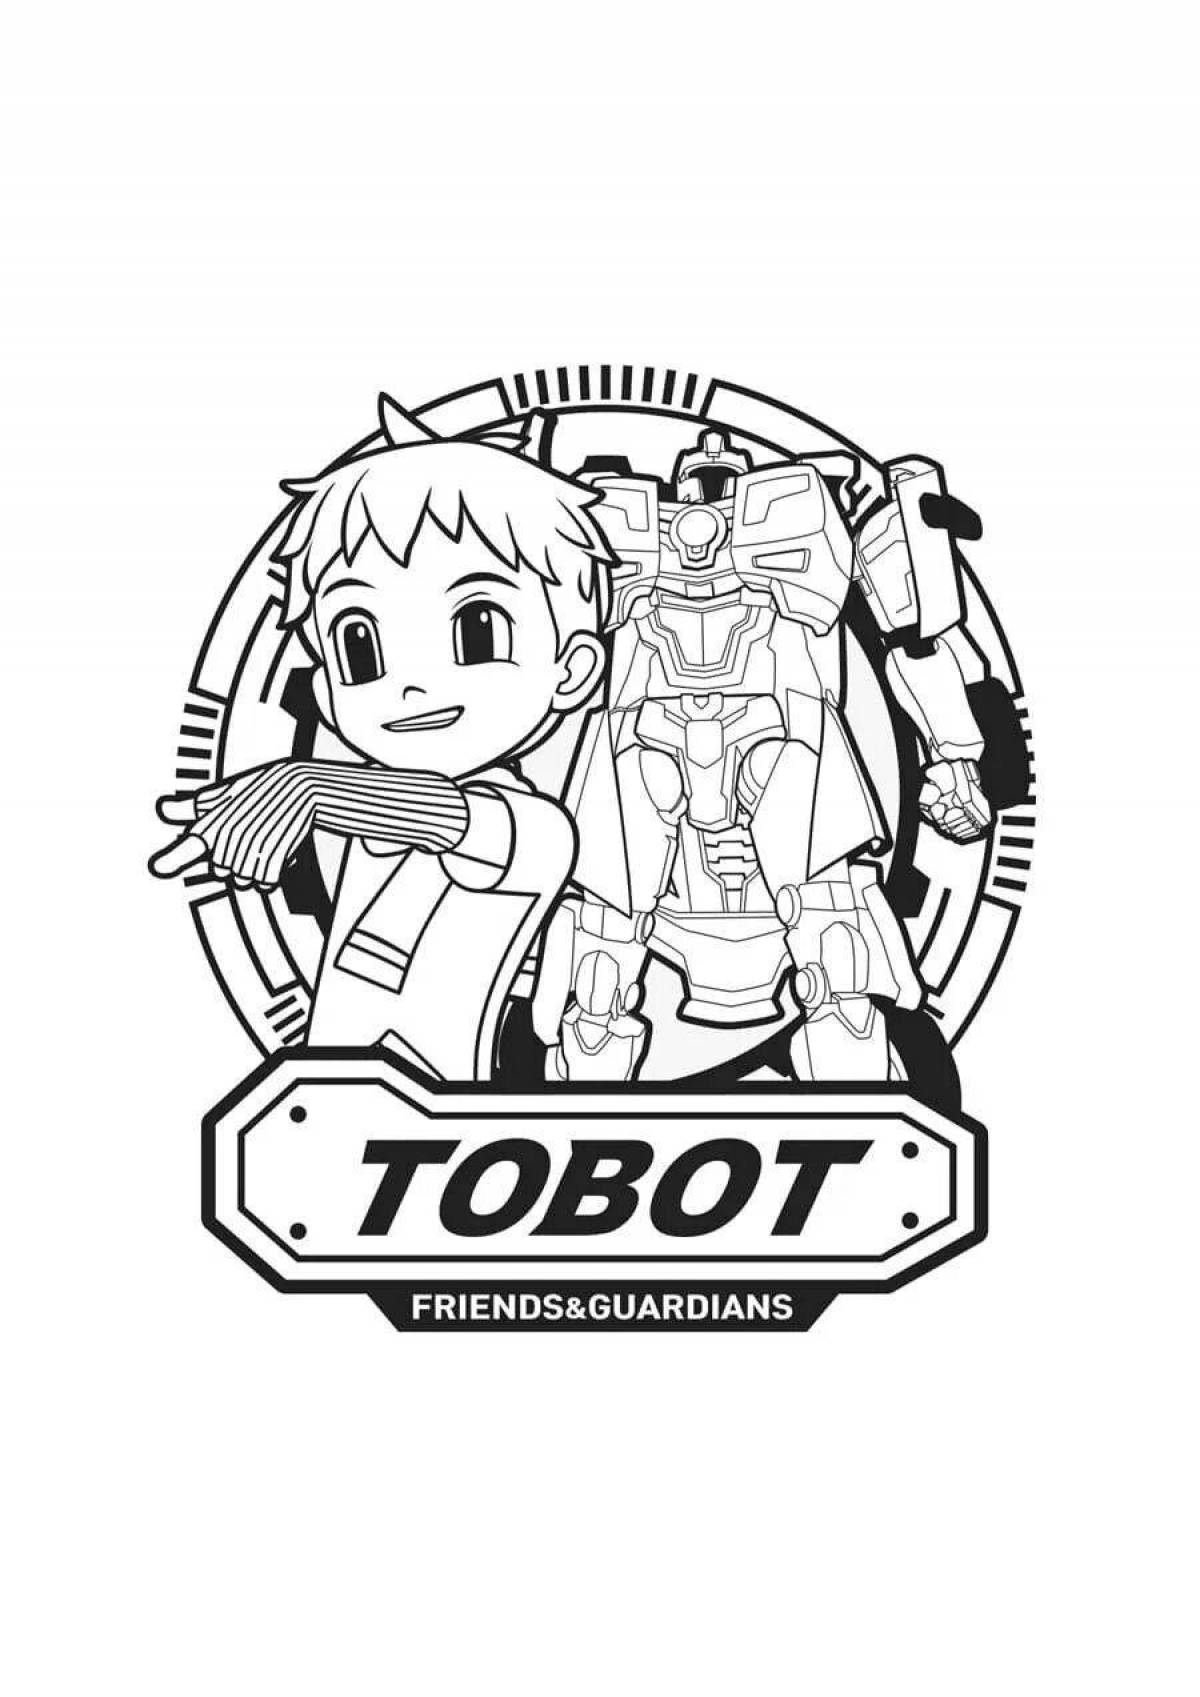 Charming tobot r coloring book